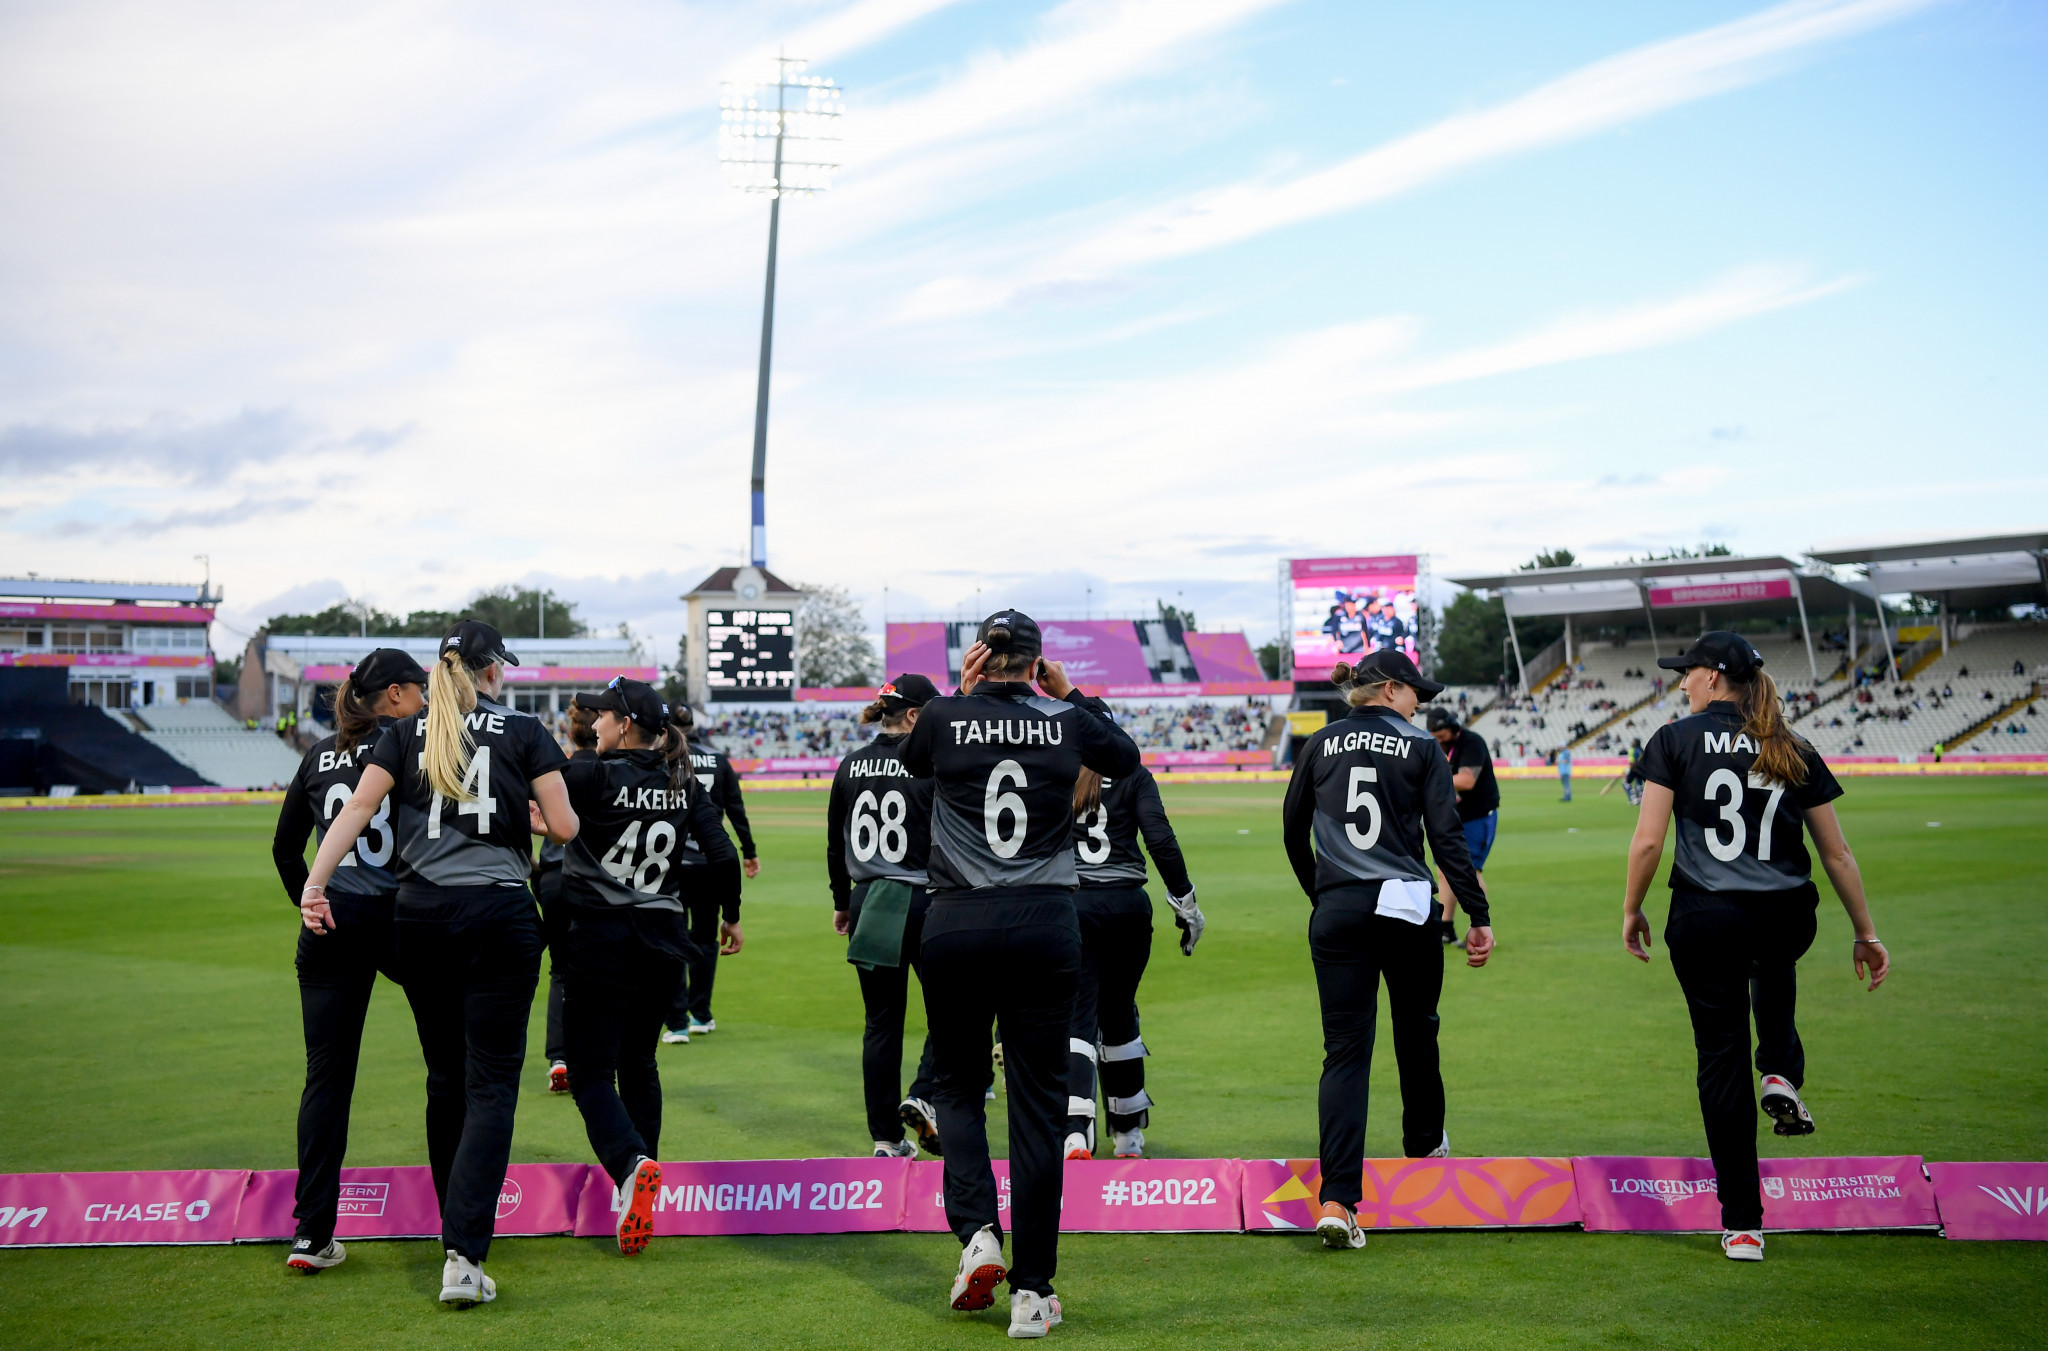 New Zealand secured a win at Edgbaston in women's cricket against Sri Lanka ©Getty Images